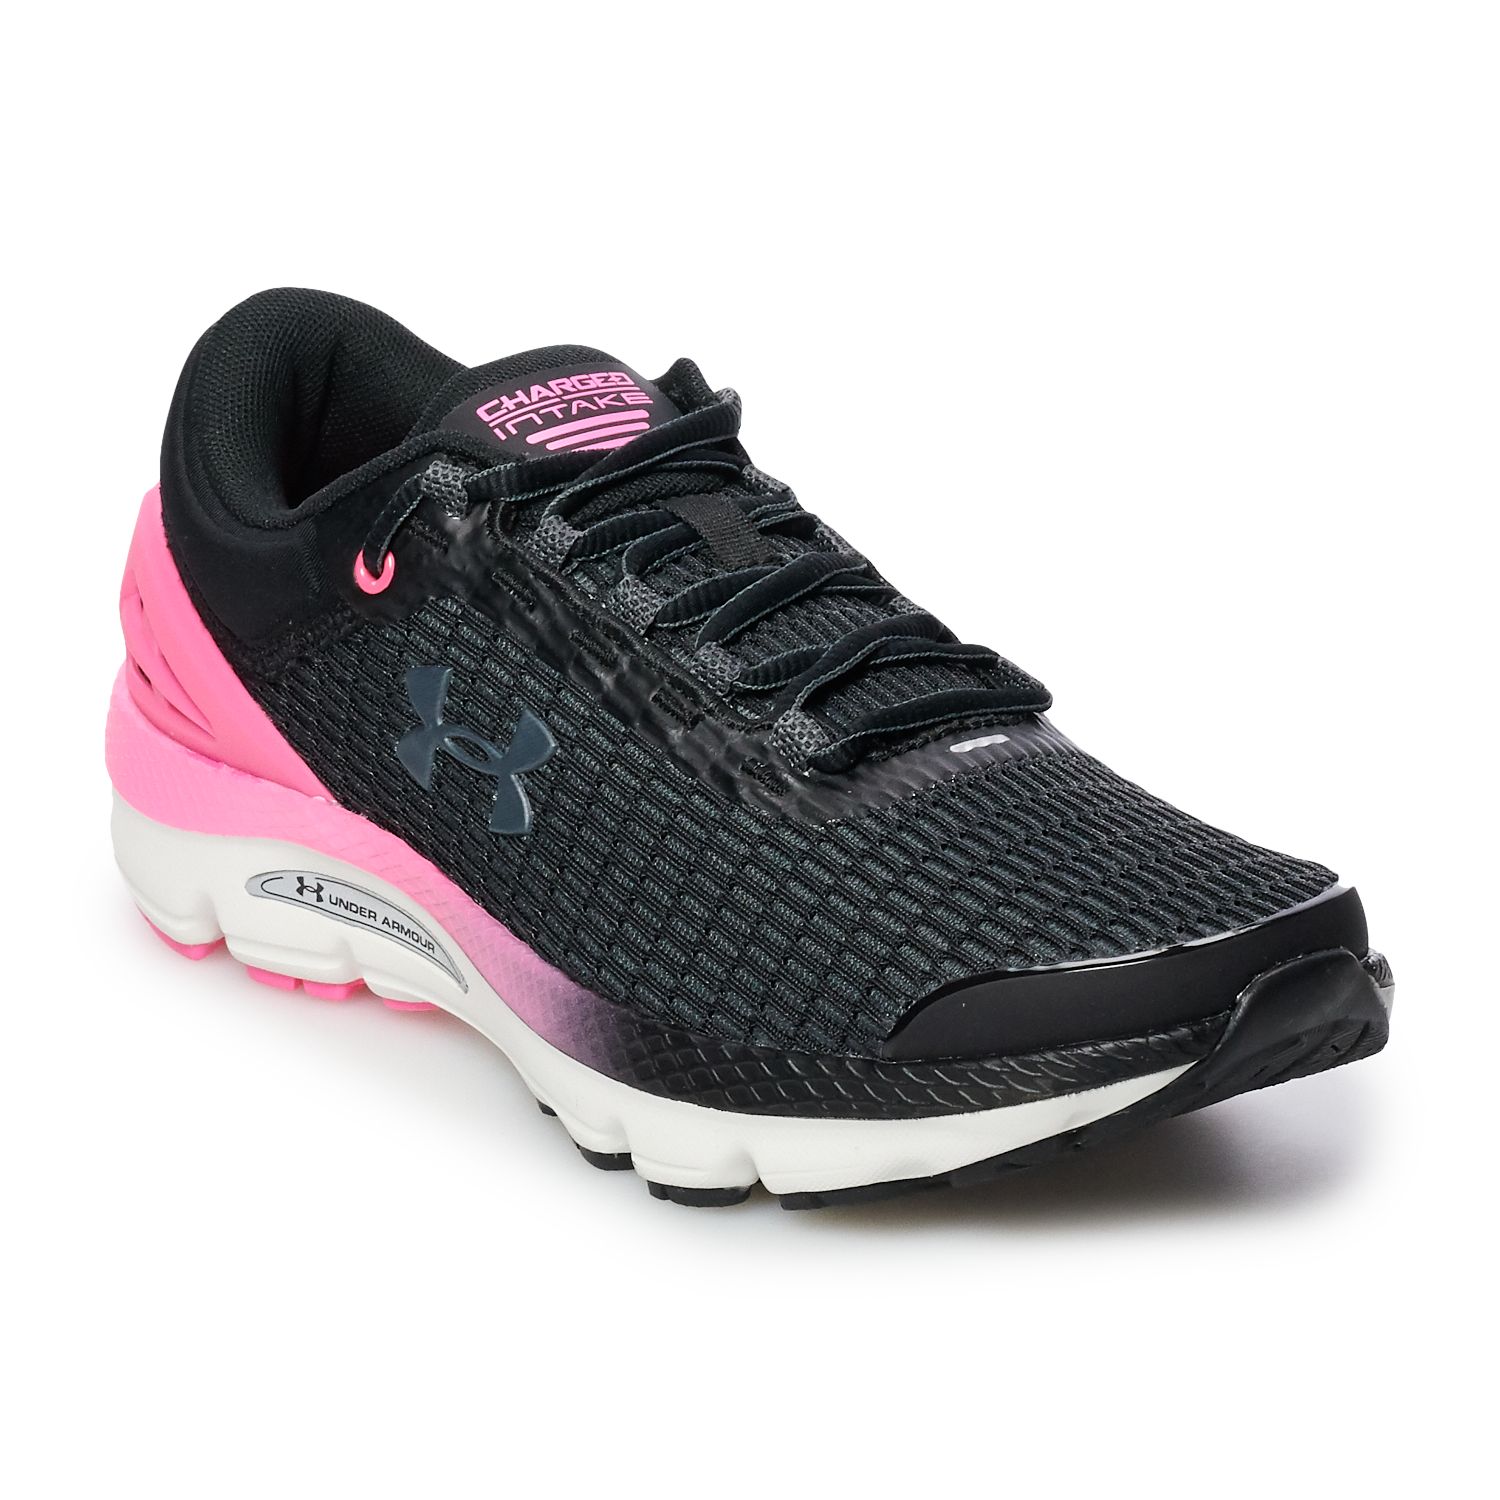 under armour pink tennis shoes